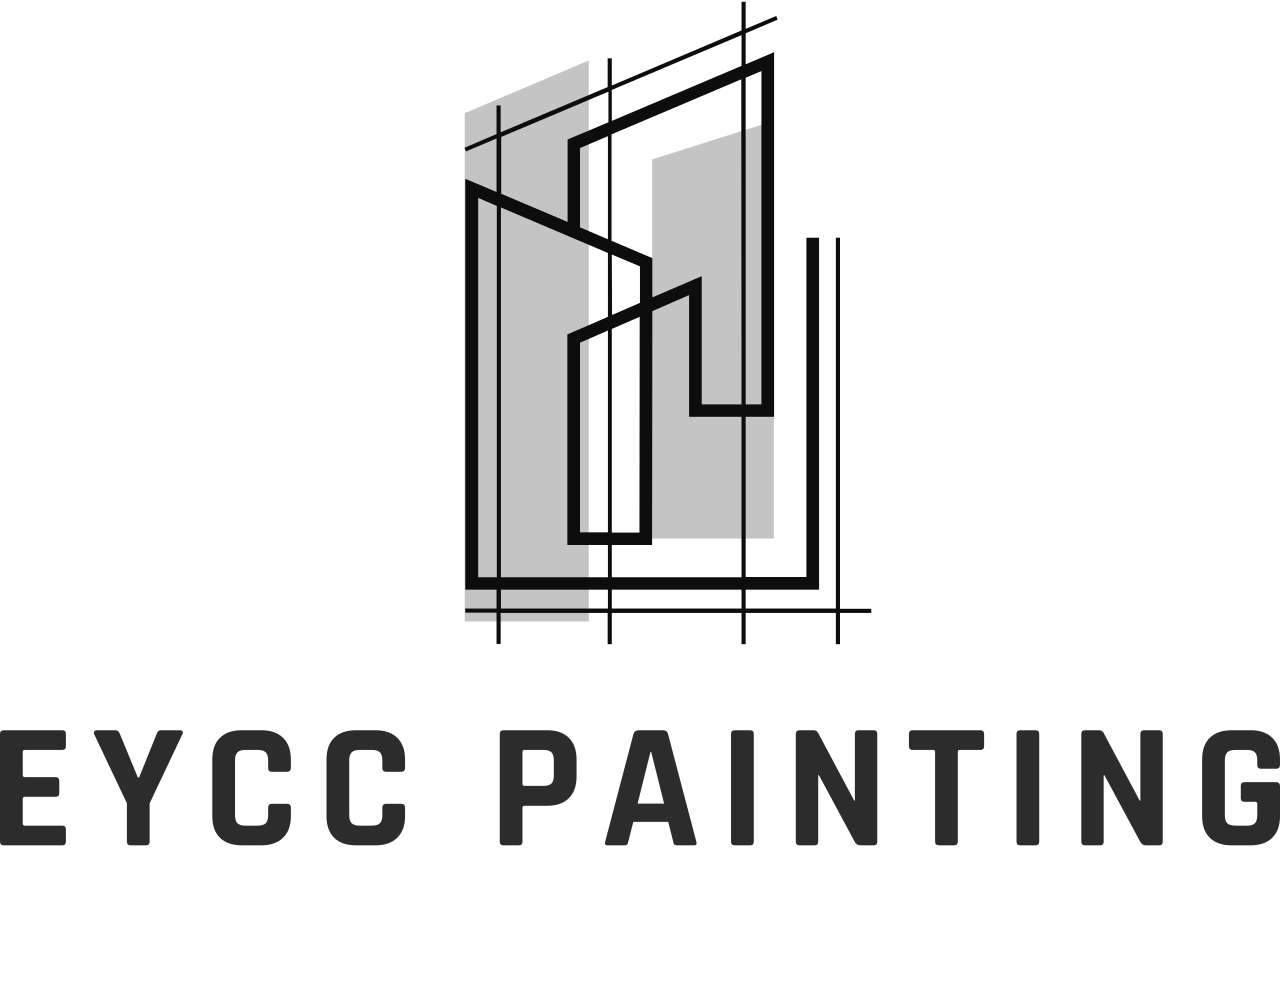 EYCC Painting 's web page